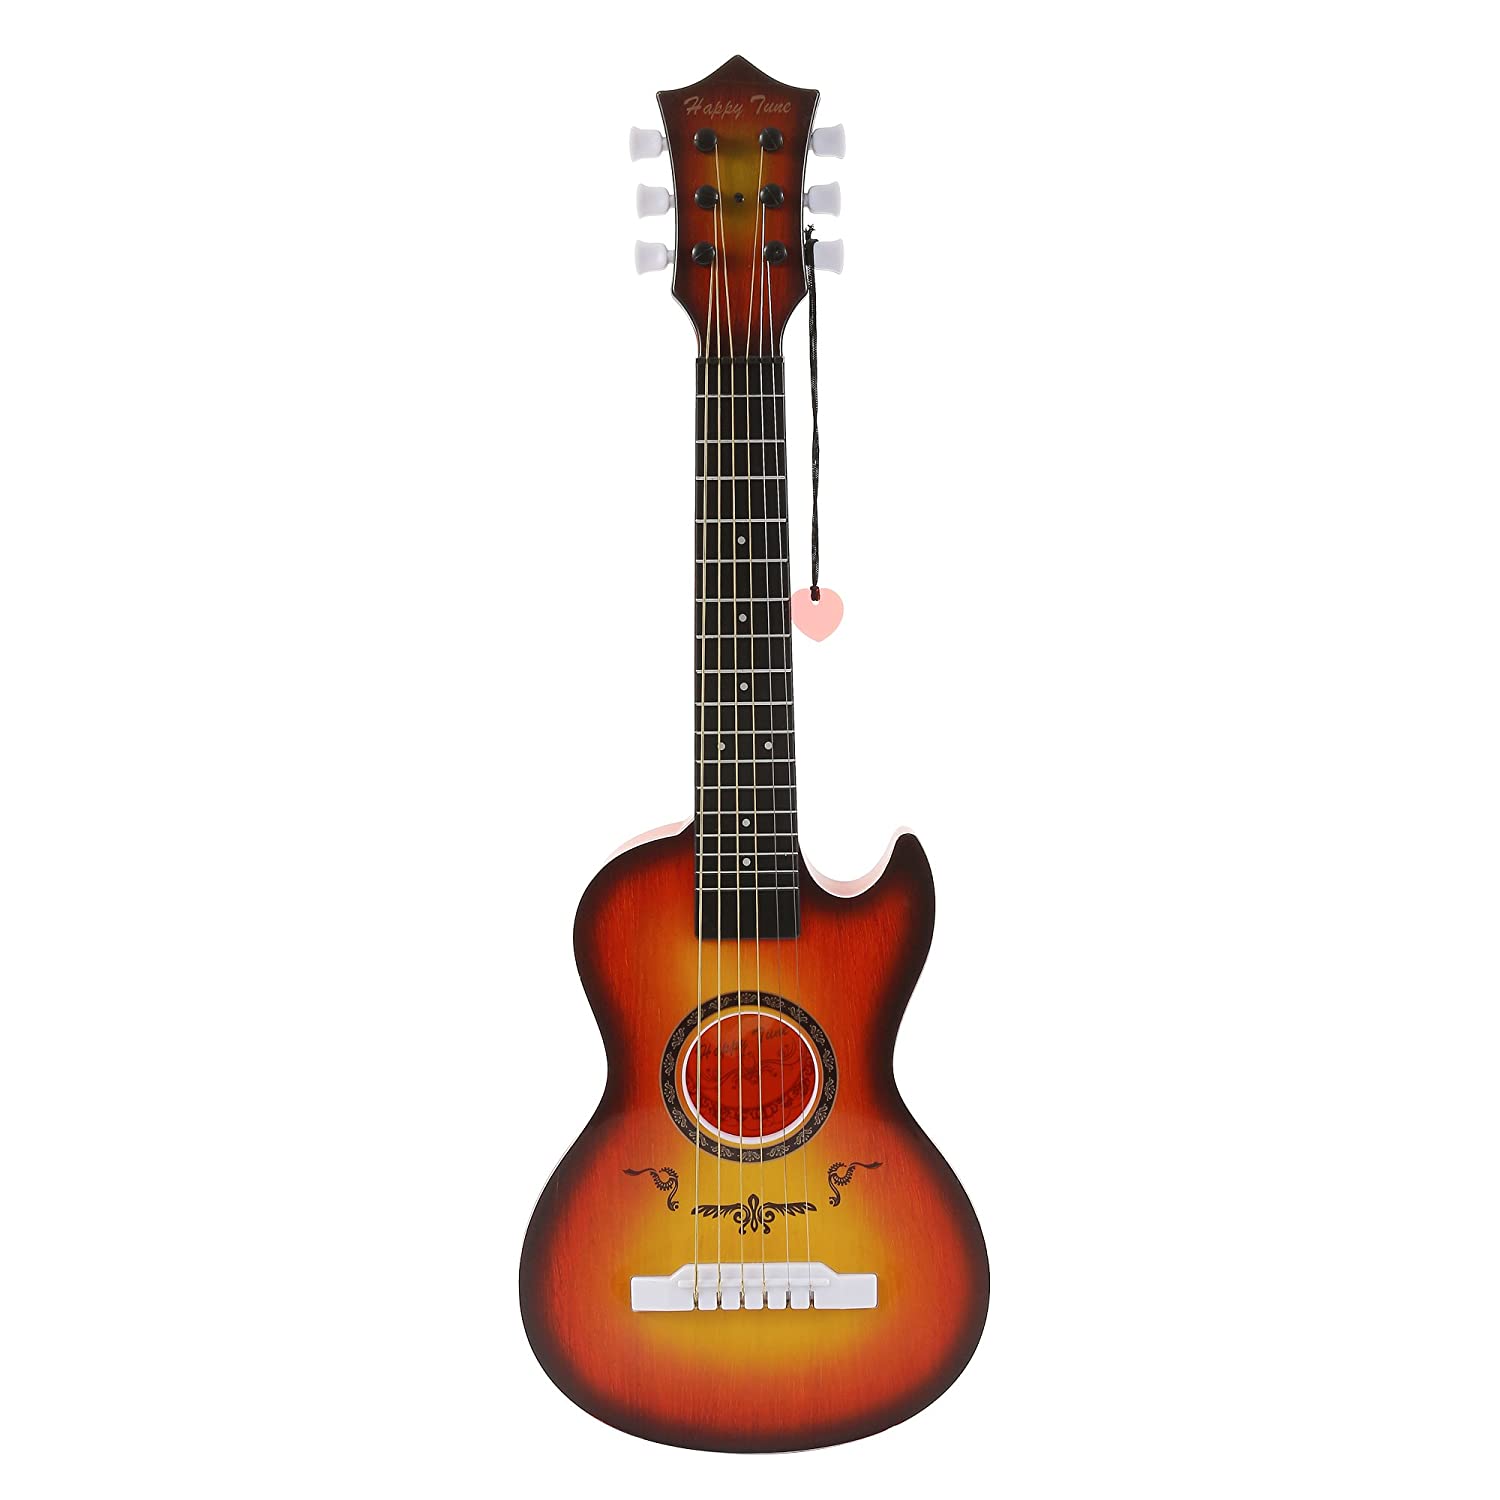 Liberty Imports 23 Inch Happy Tune 6 String Acoustic Guitar Kids Toy - Vibrant Sounds and Realistic Strings - Beginner Practice Musical Instrument